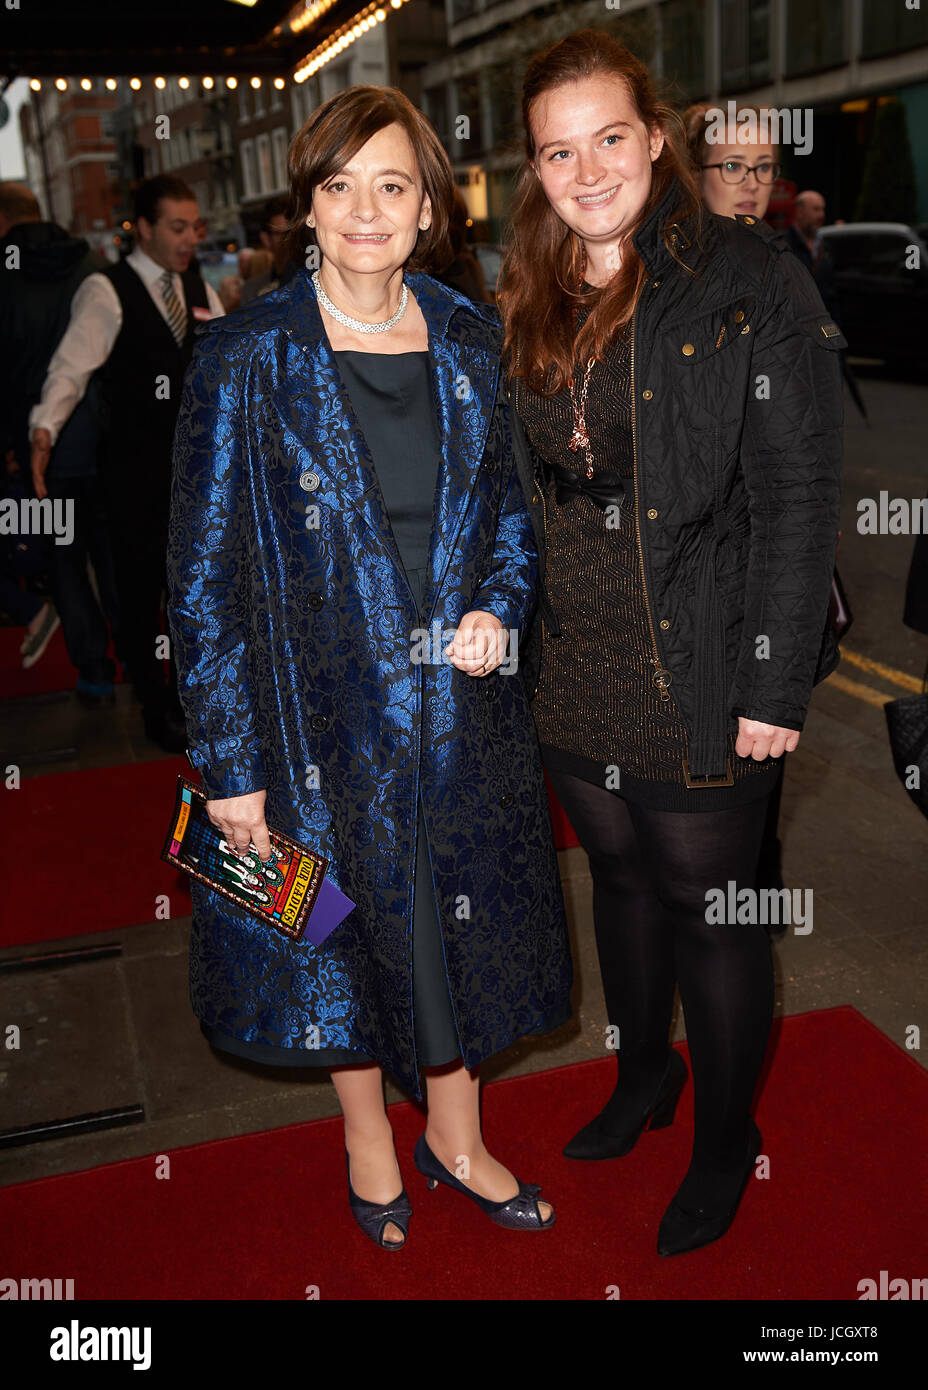 'Our Lady of Perpetual Succour' Press night at the Duke of York's Theatre - Arrivals  Featuring: Cherie Blair, Kathryn Blair Where: London, United Kingdom When: 15 May 2017 Credit: Alan West/WENN.com Stock Photo